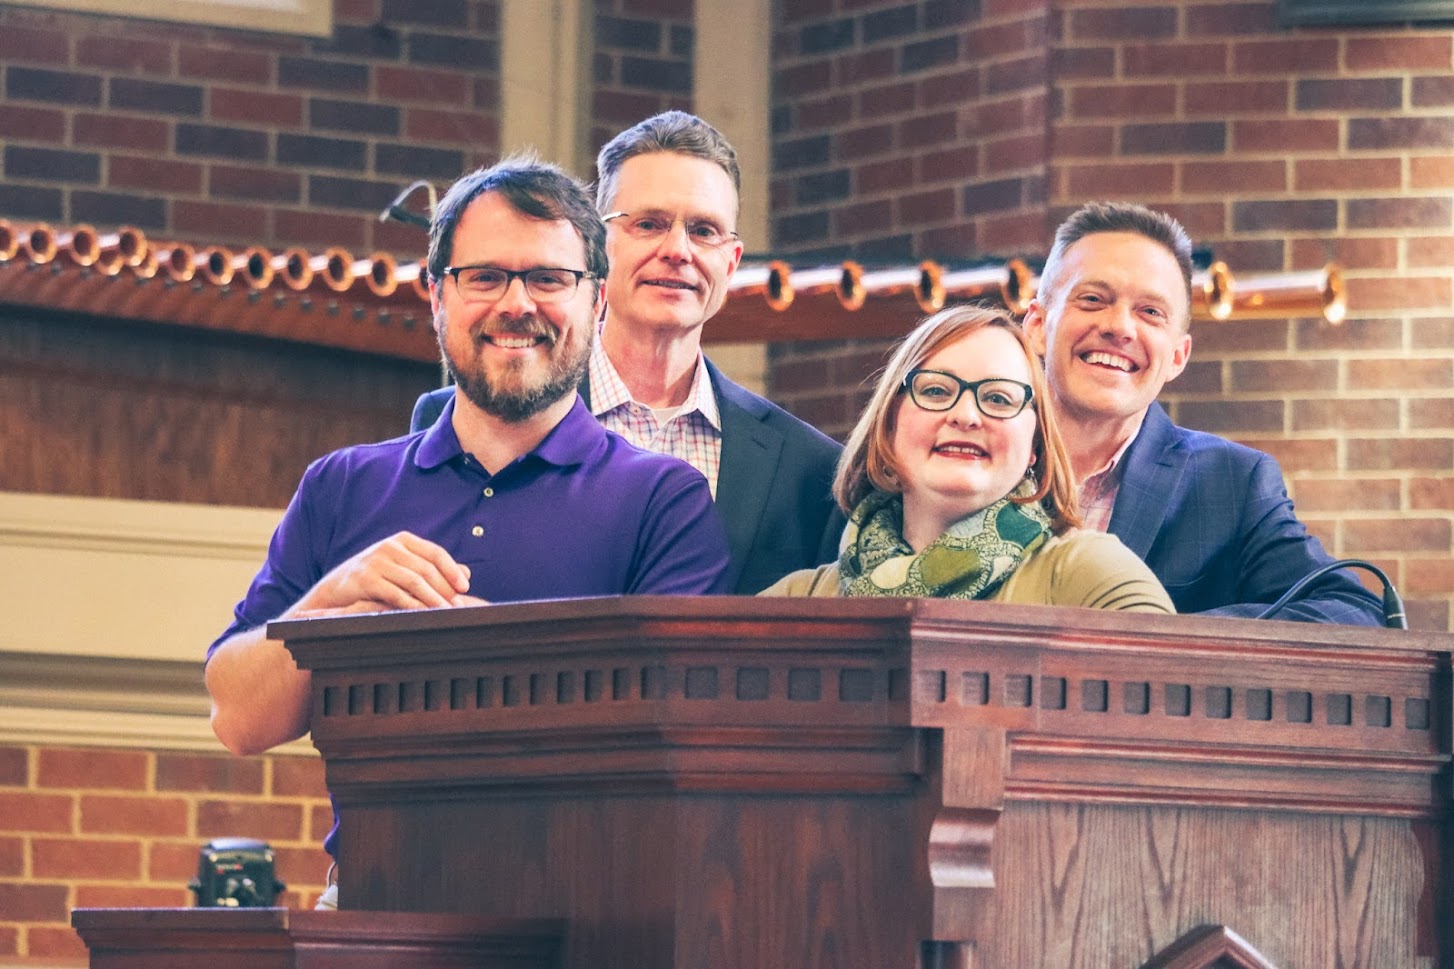 The four Tech alumni employed by FUMC standing in the church.